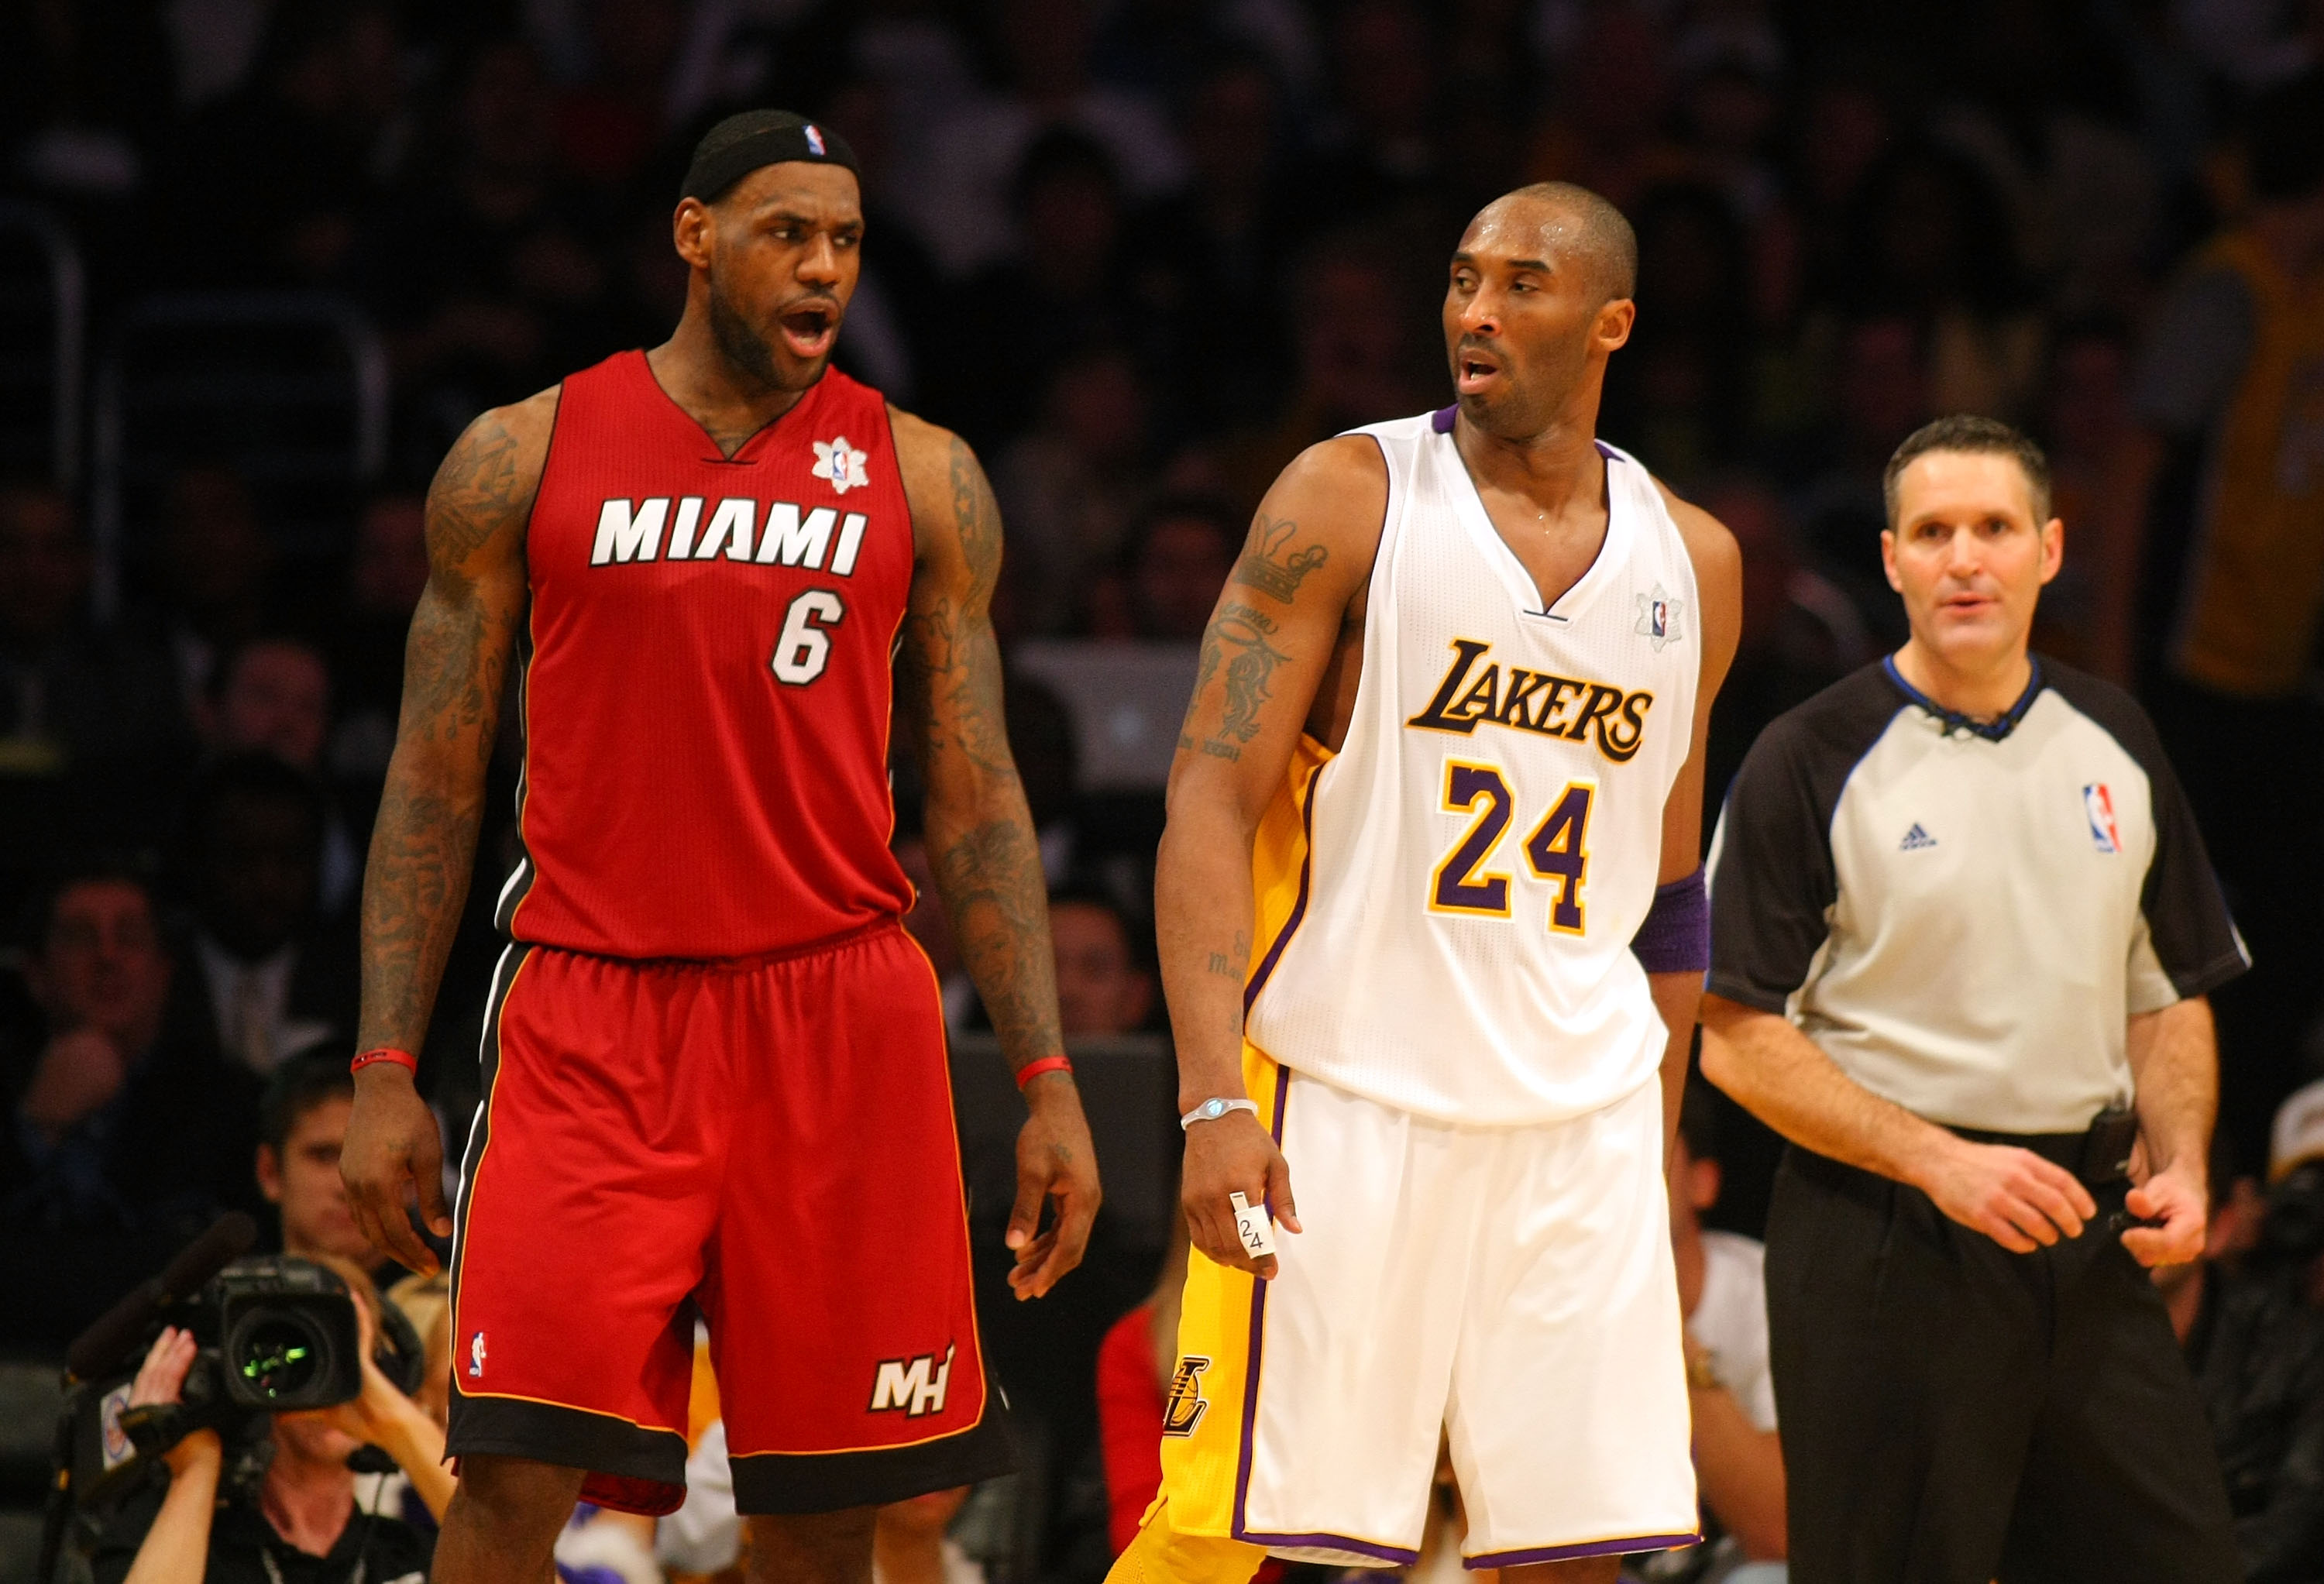 Kobe Bryant vs. LeBron James: Breaking Down and Comparing Their